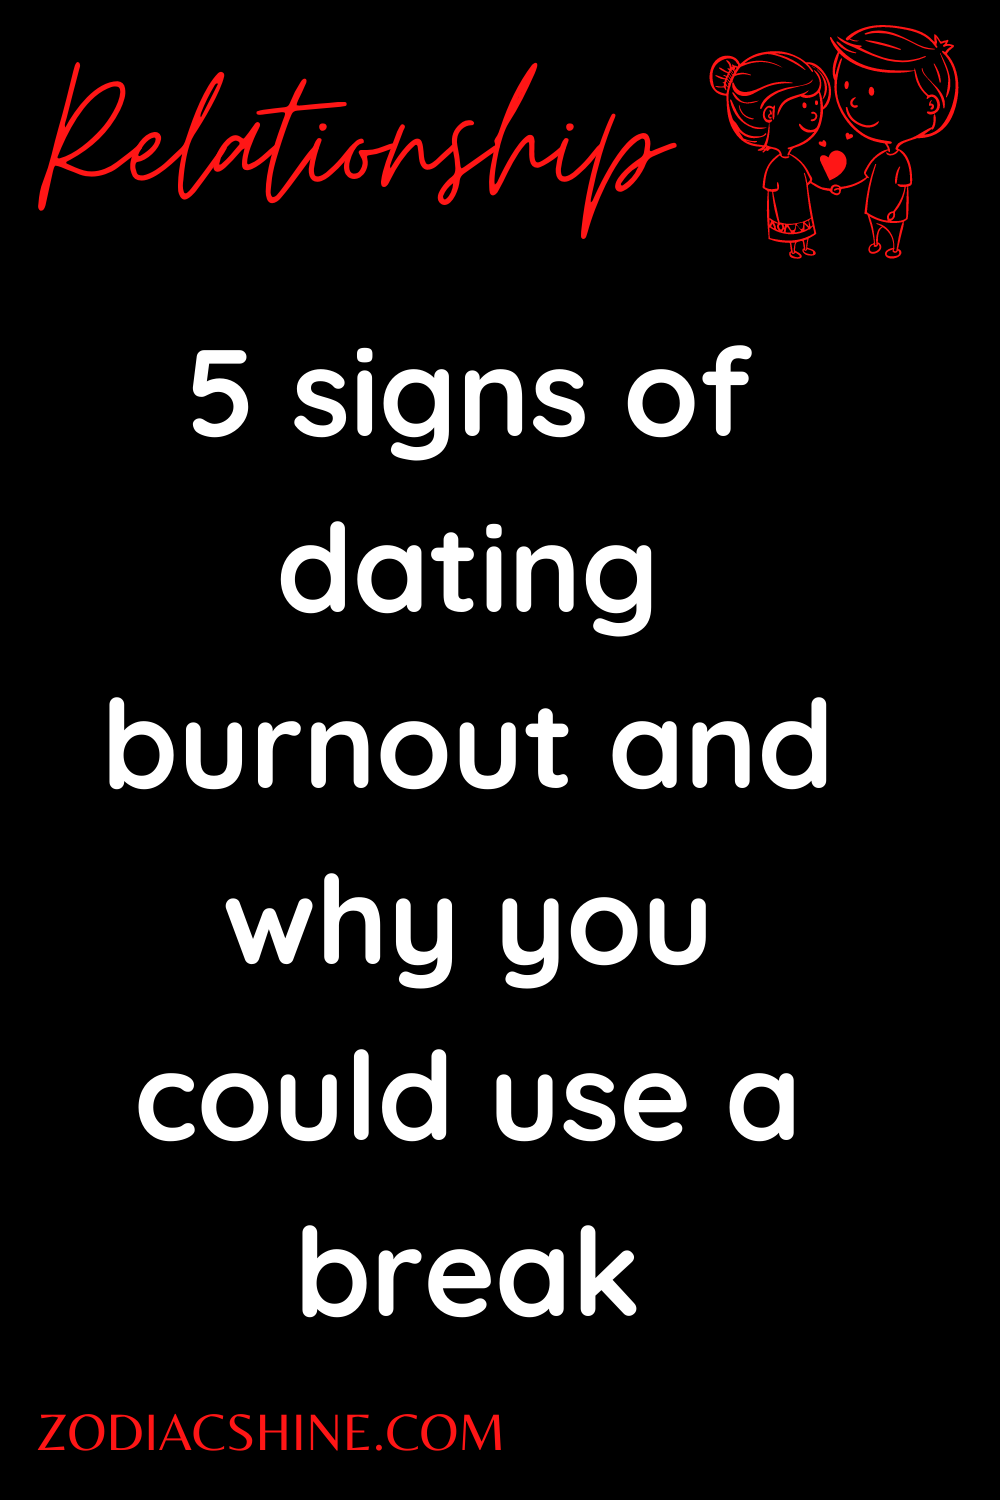 5 signs of dating burnout and why you could use a break